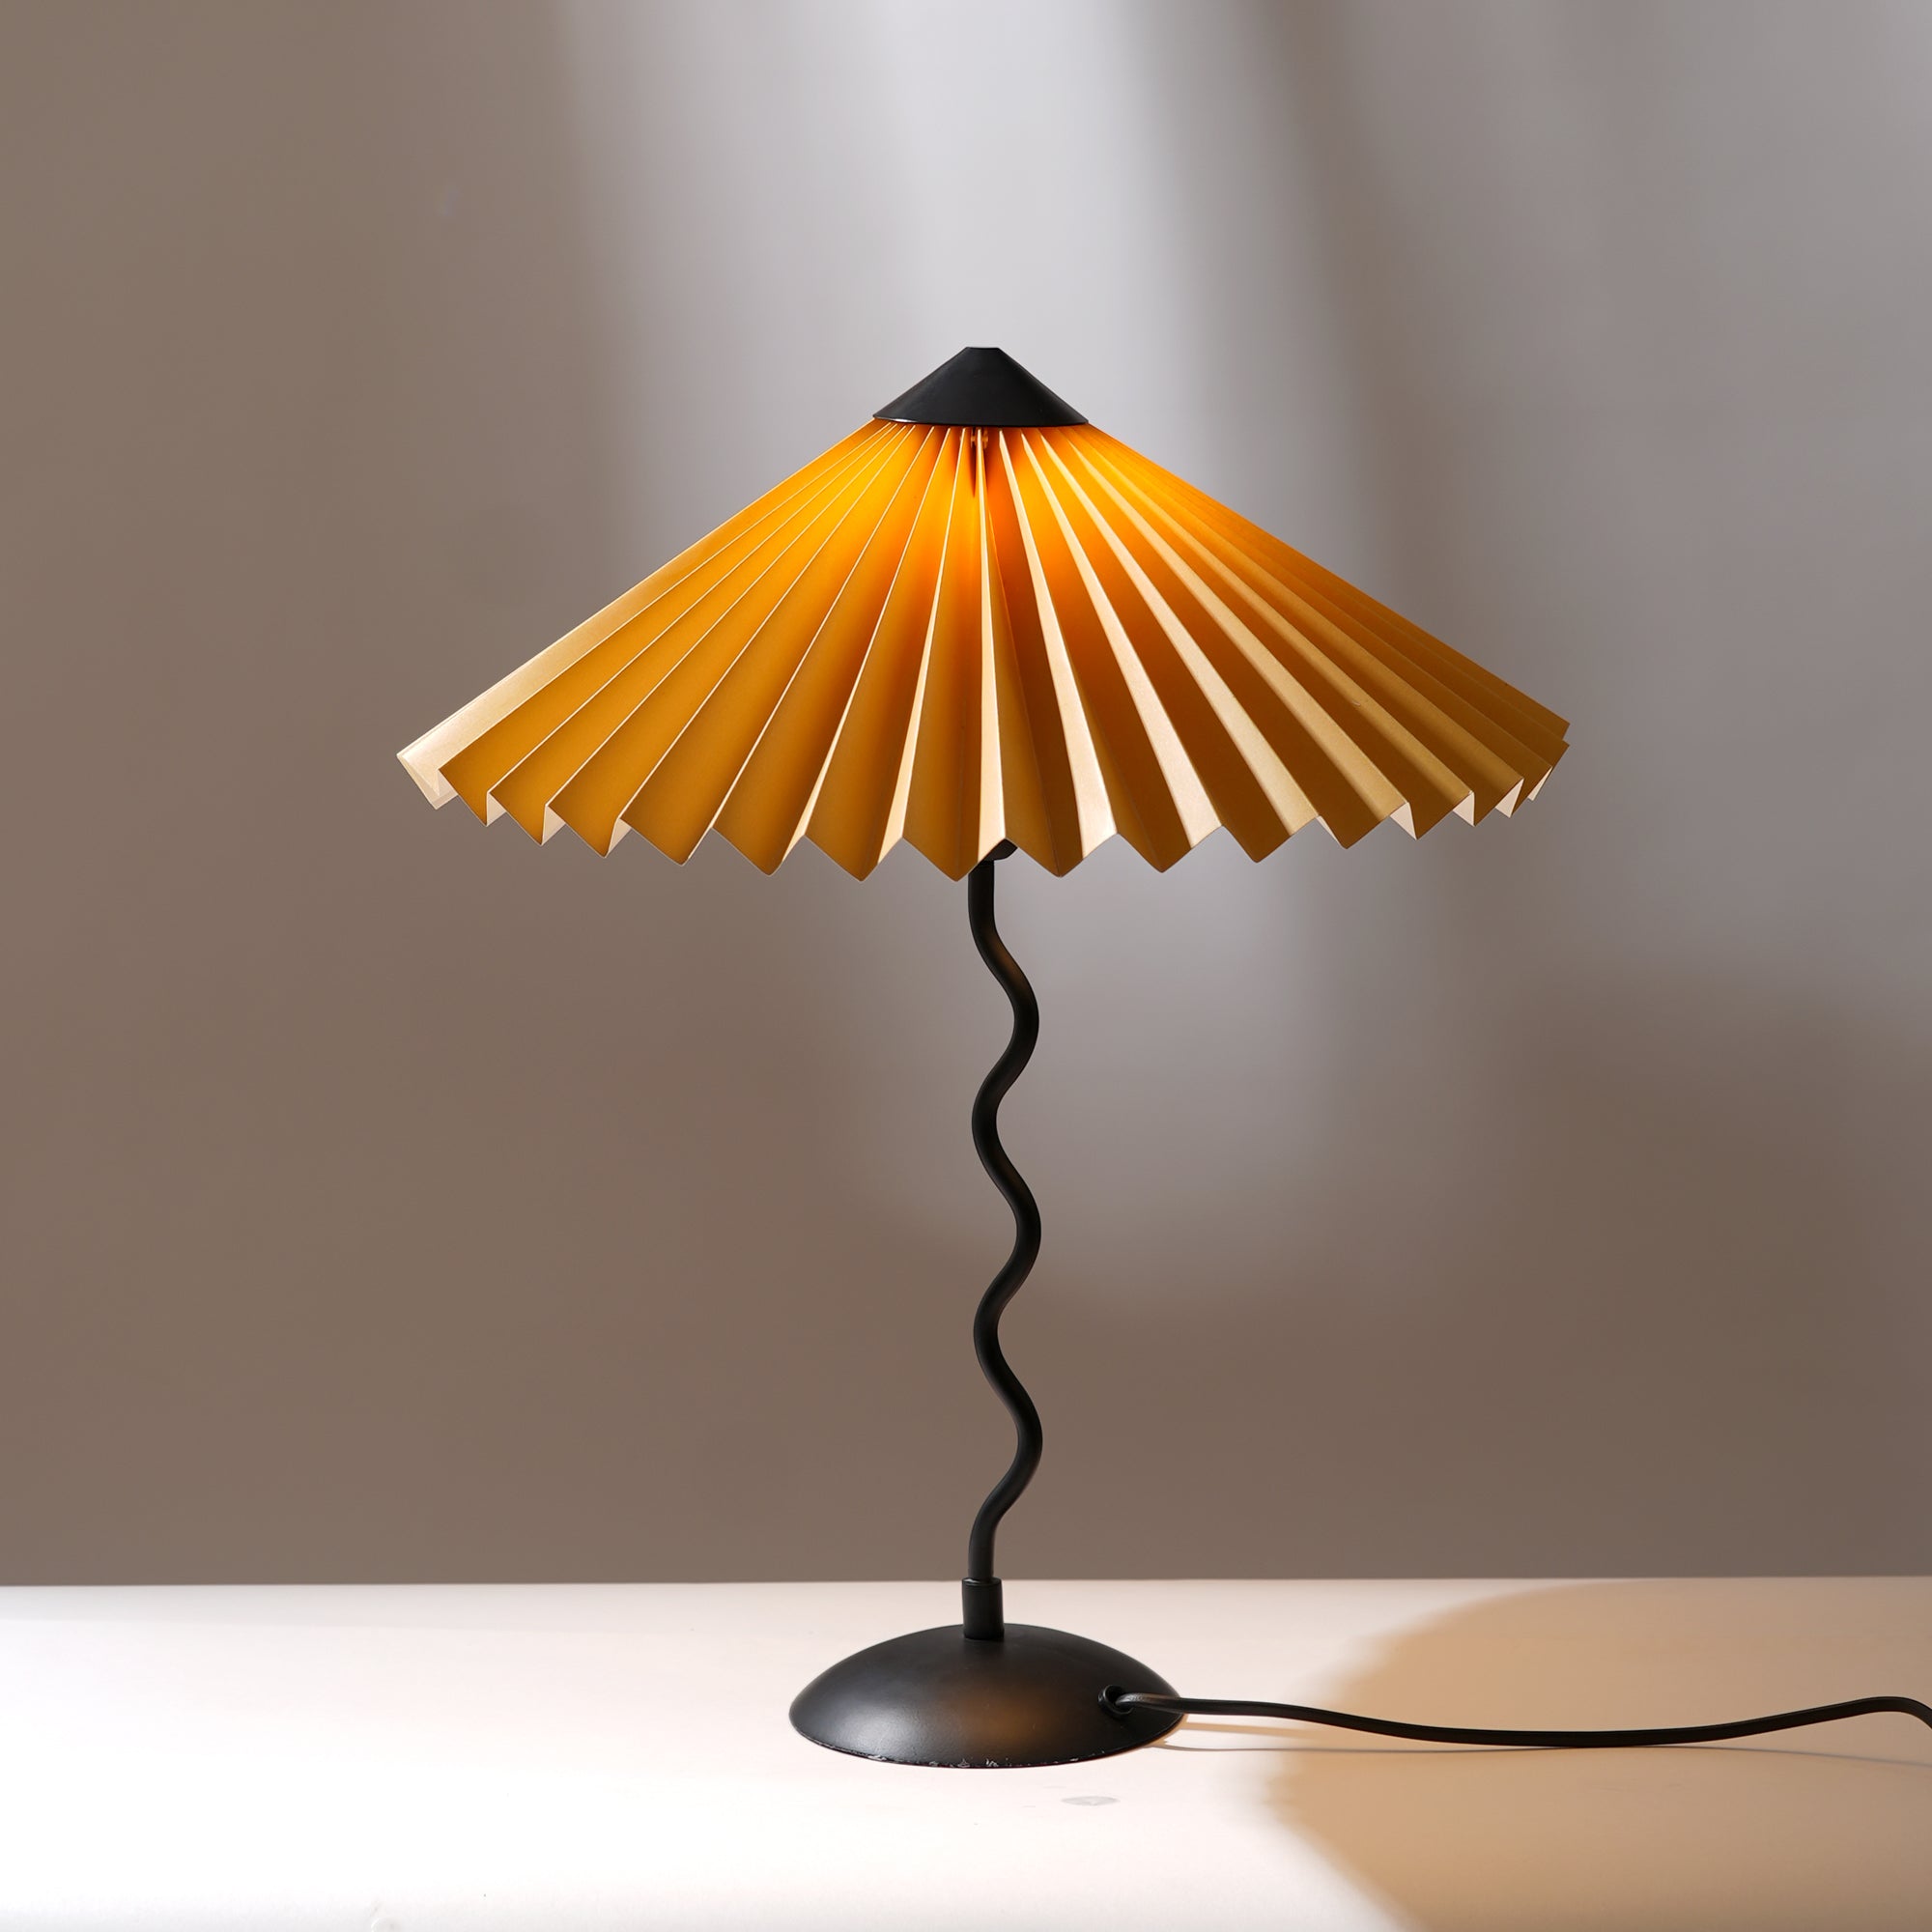 Wavy Table Lamp - Contemporary Metal Base Lighting with Handpleated Shade